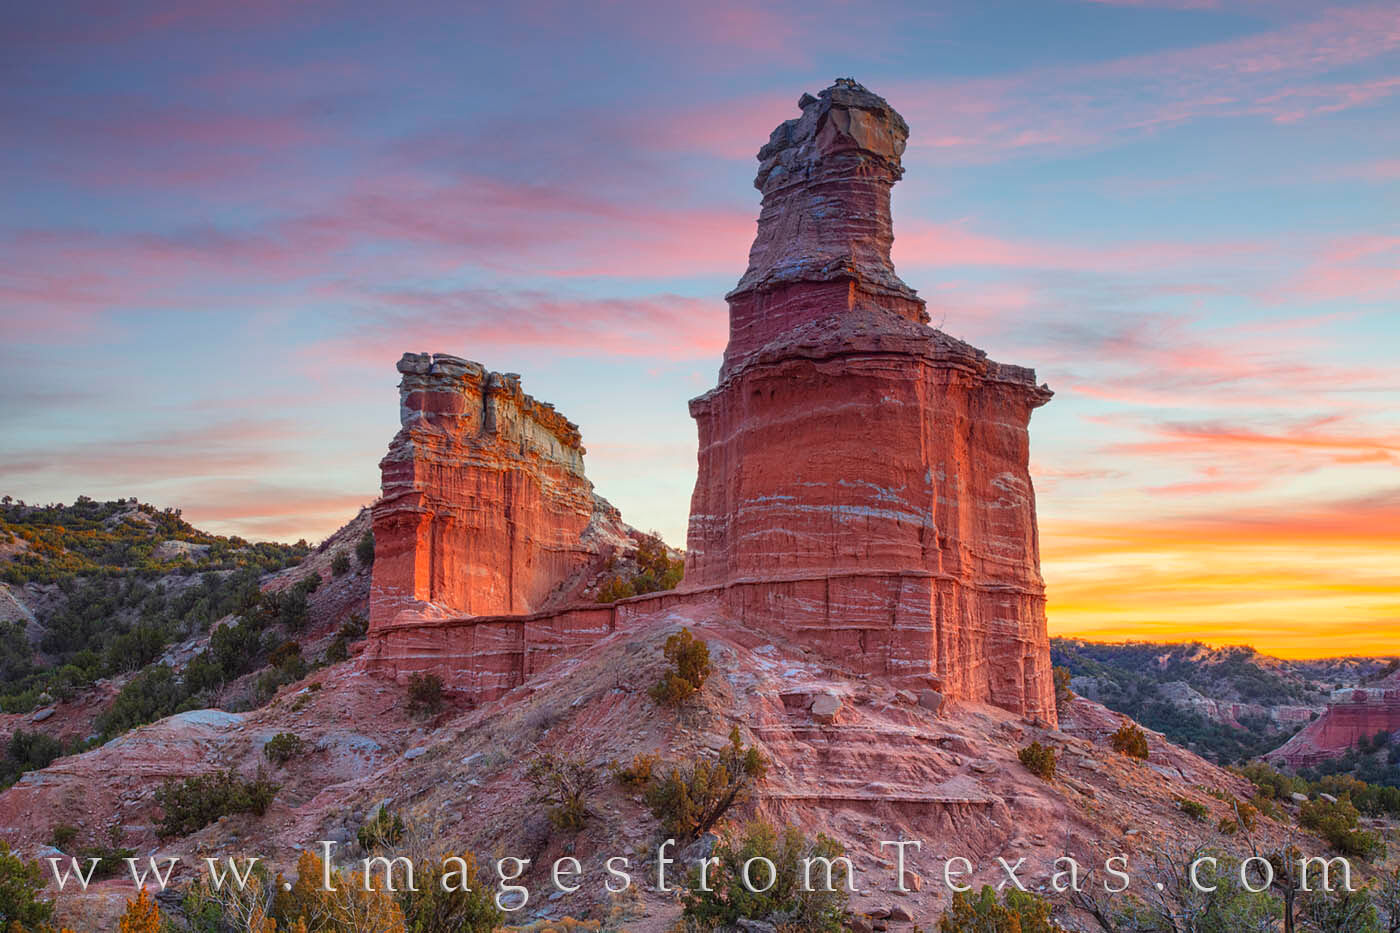 One of my favorite places in Palo Duro Canyon in the Lighthouse - an iconic hoodoo at the end of a well-traveled trail. The round...